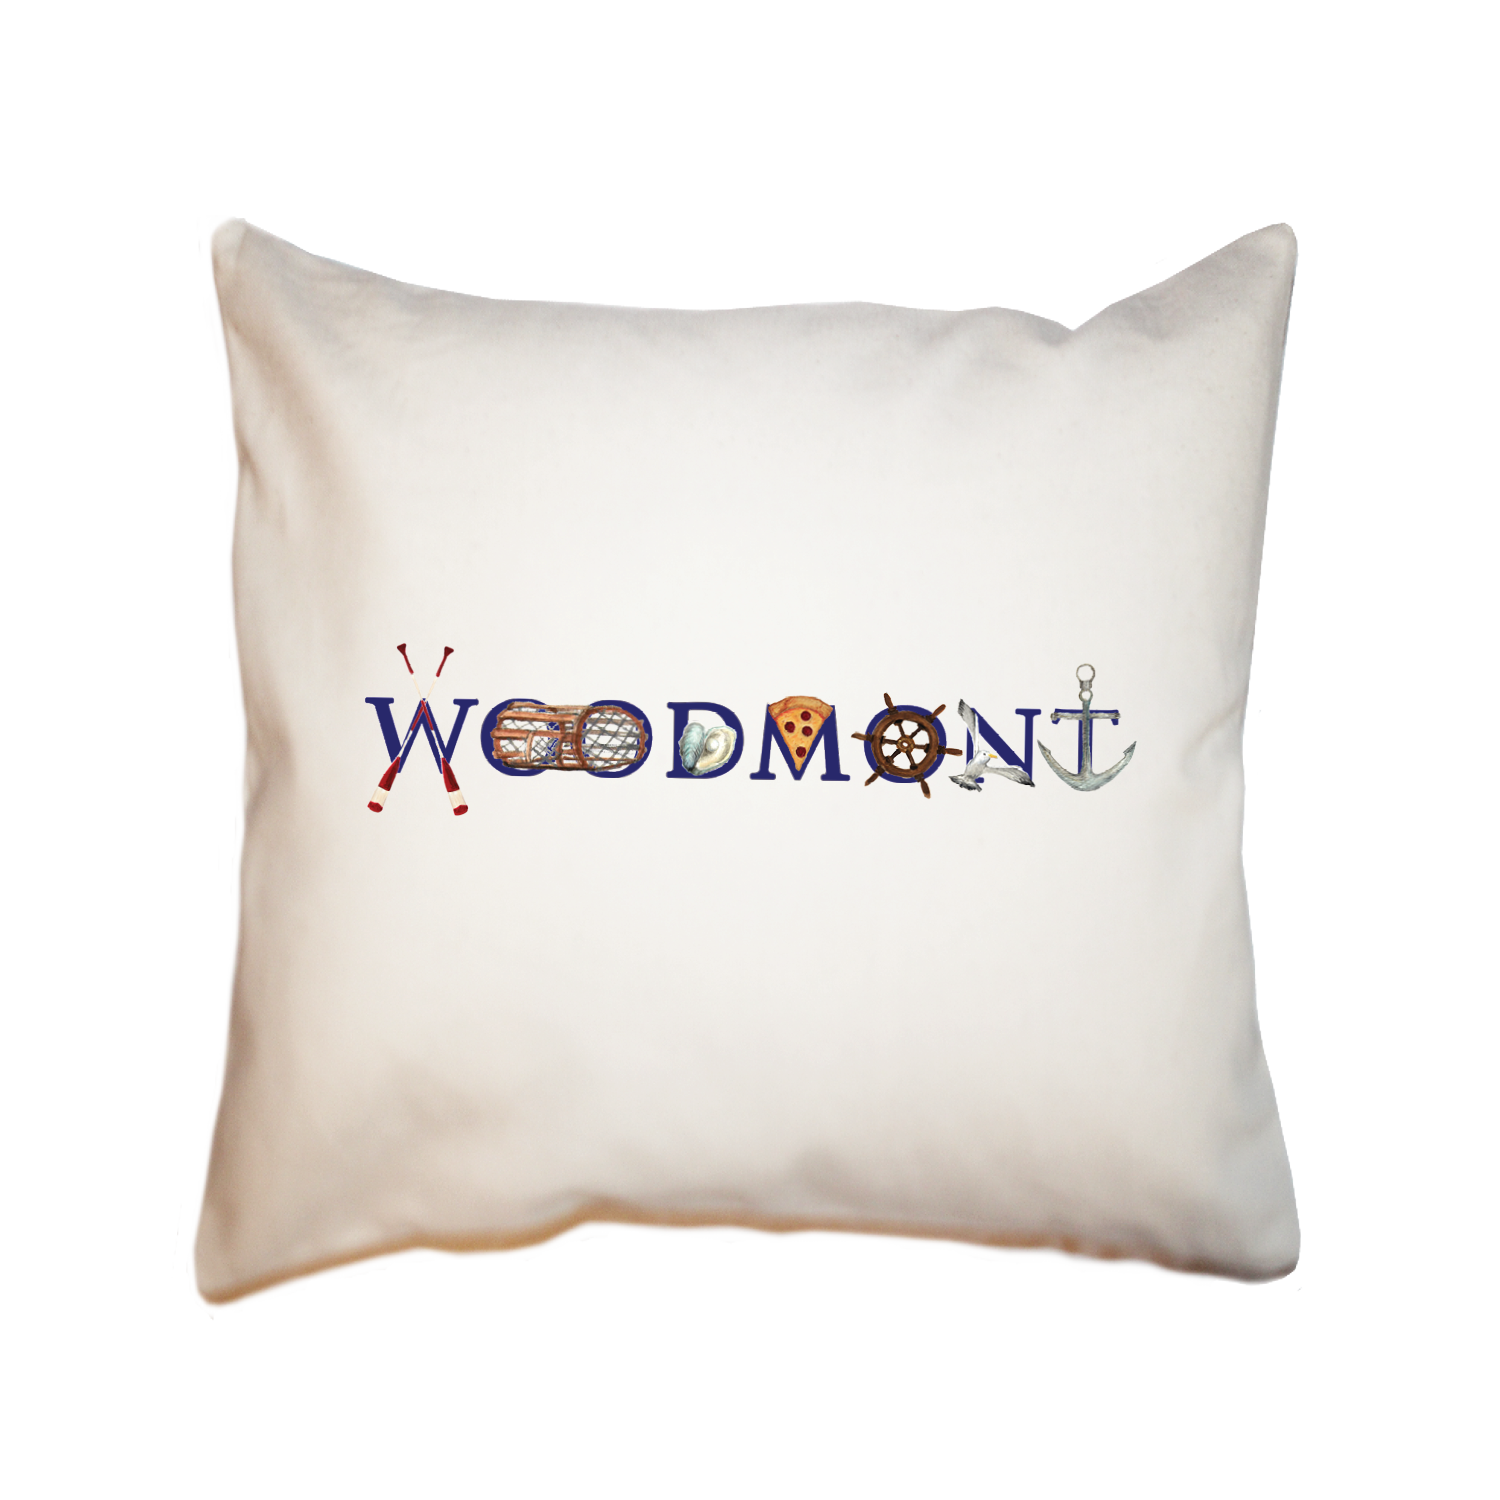 woodmont square pillow